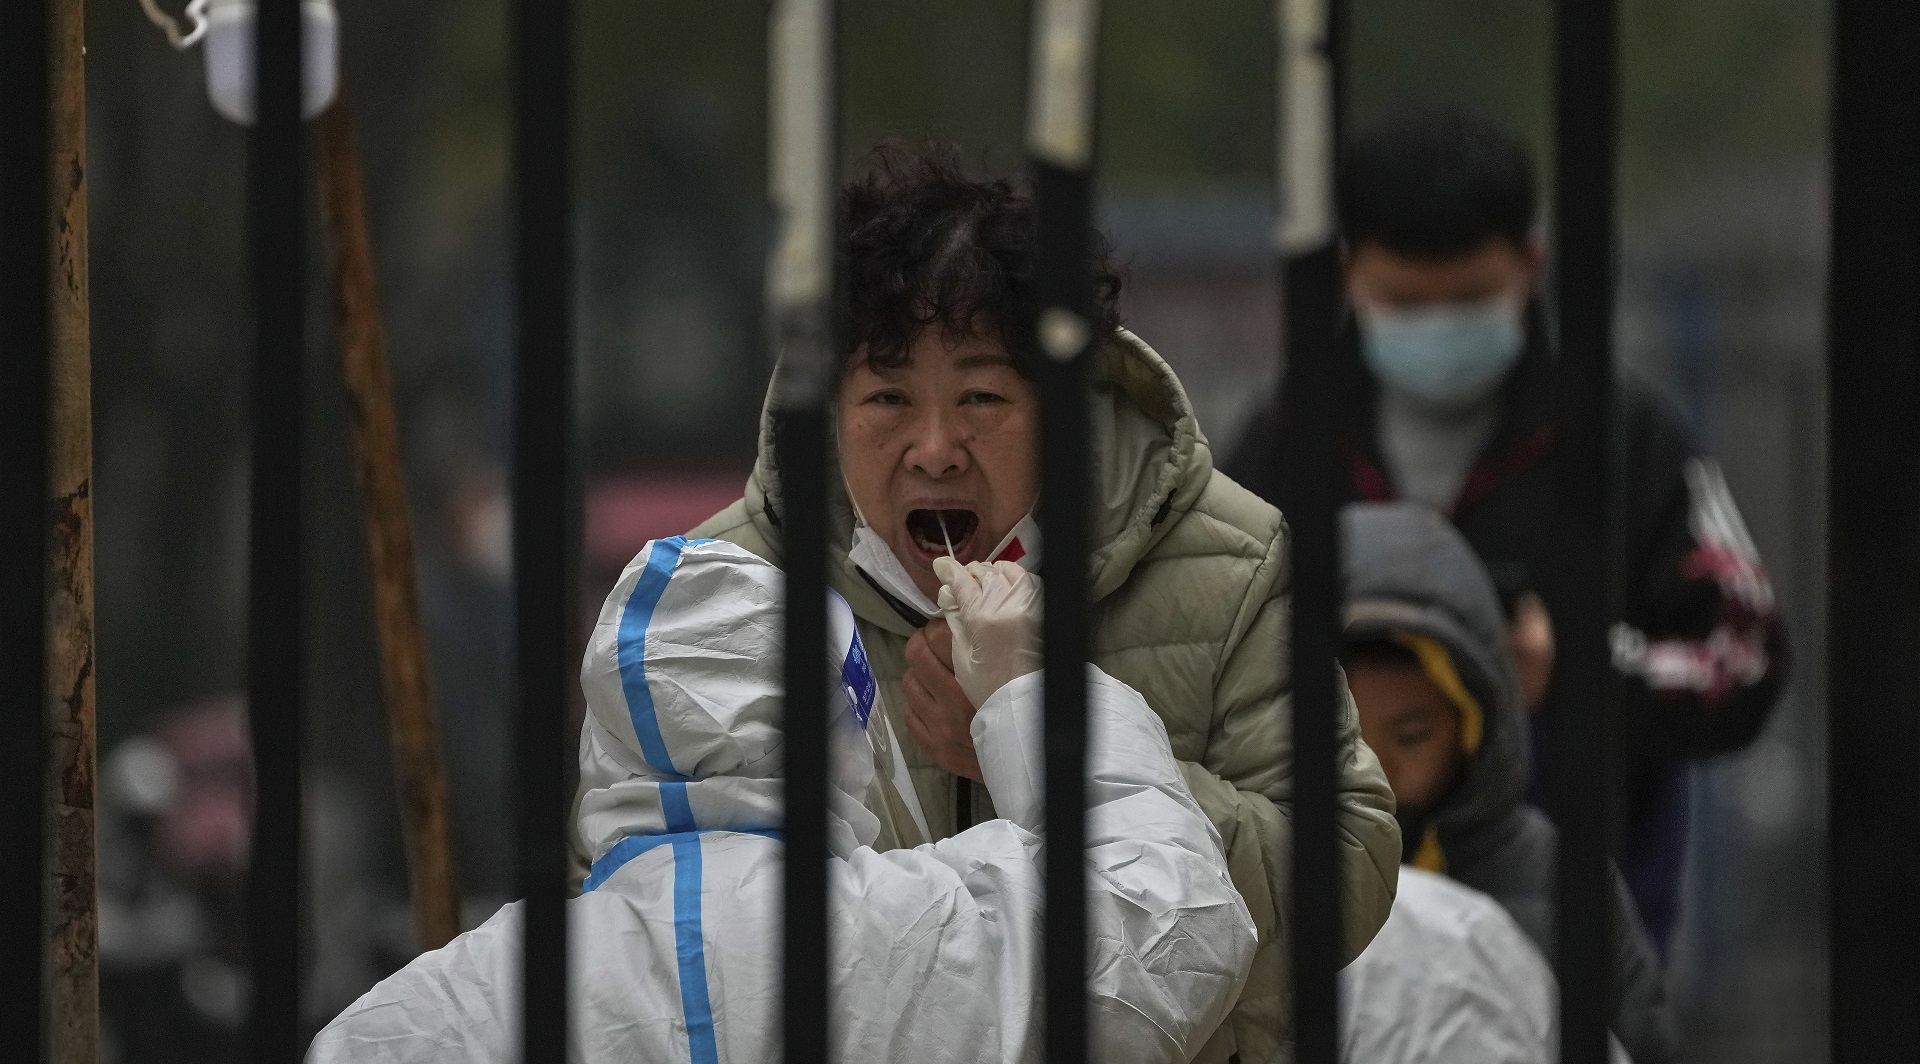 A woman has her routine COVID-19 test at a coronavirus testing site setup inside a residential compound in Beijing, Thursday, Nov. 24, 2022. China is expanding lockdowns, including in a central city where factory workers clashed this week with police, as its number of COVID-19 cases hit a daily record. (AP Photo/Andy Wong)